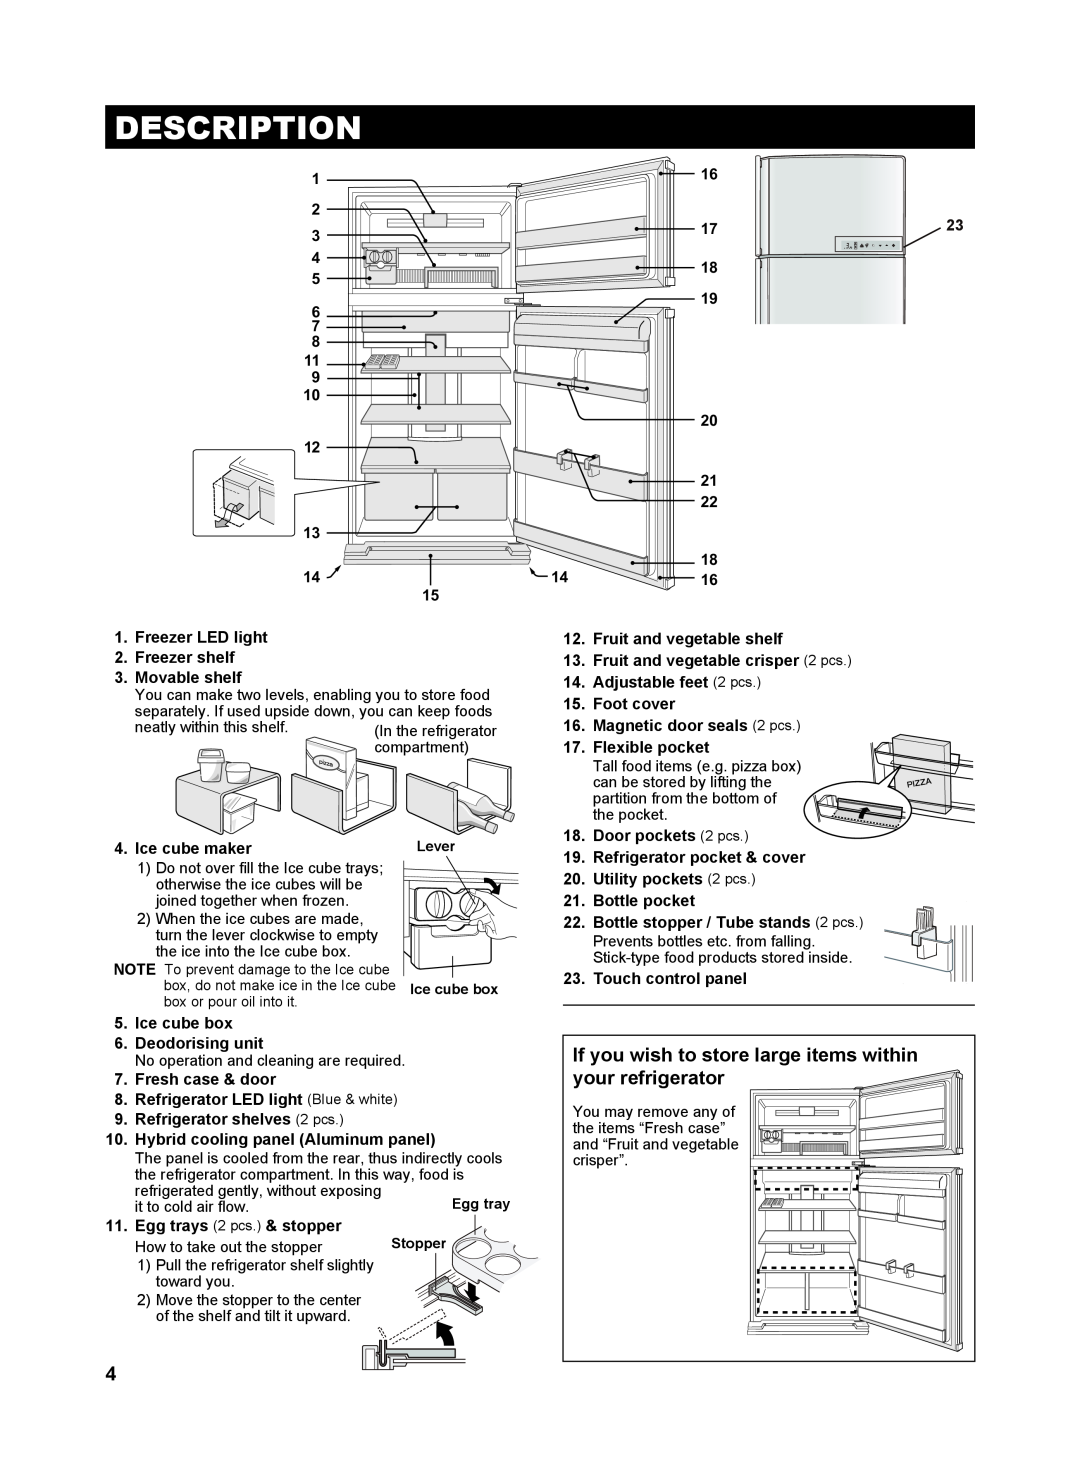 Sharp SJ-GC584R operation manual Description, If you wish to store large items within your refrigerator, Ice cube maker 